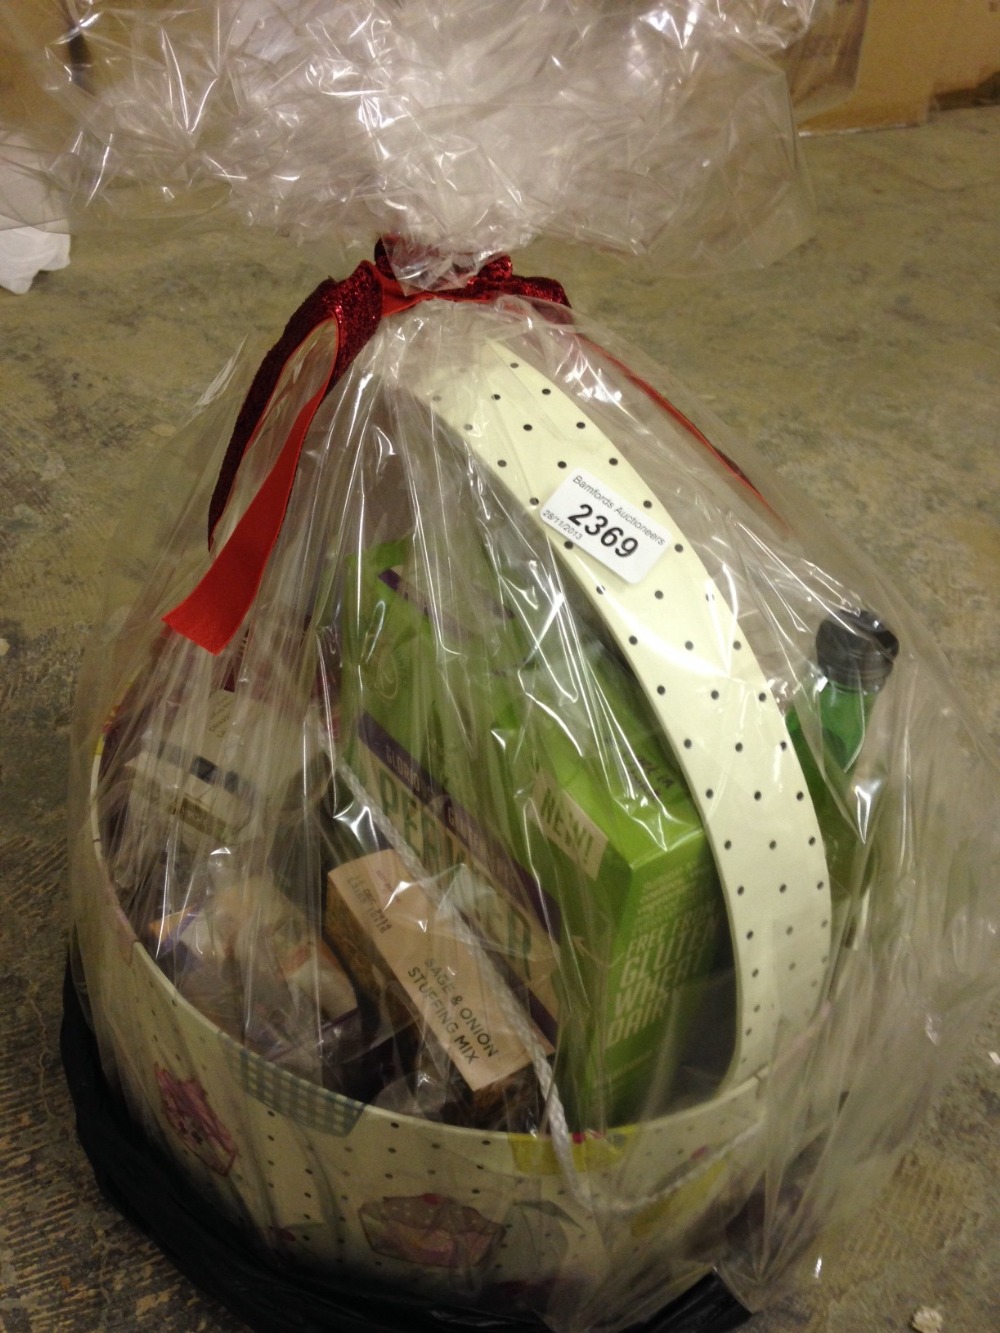 A hamper with gluten free/dairy free produce (approximately 10 items)